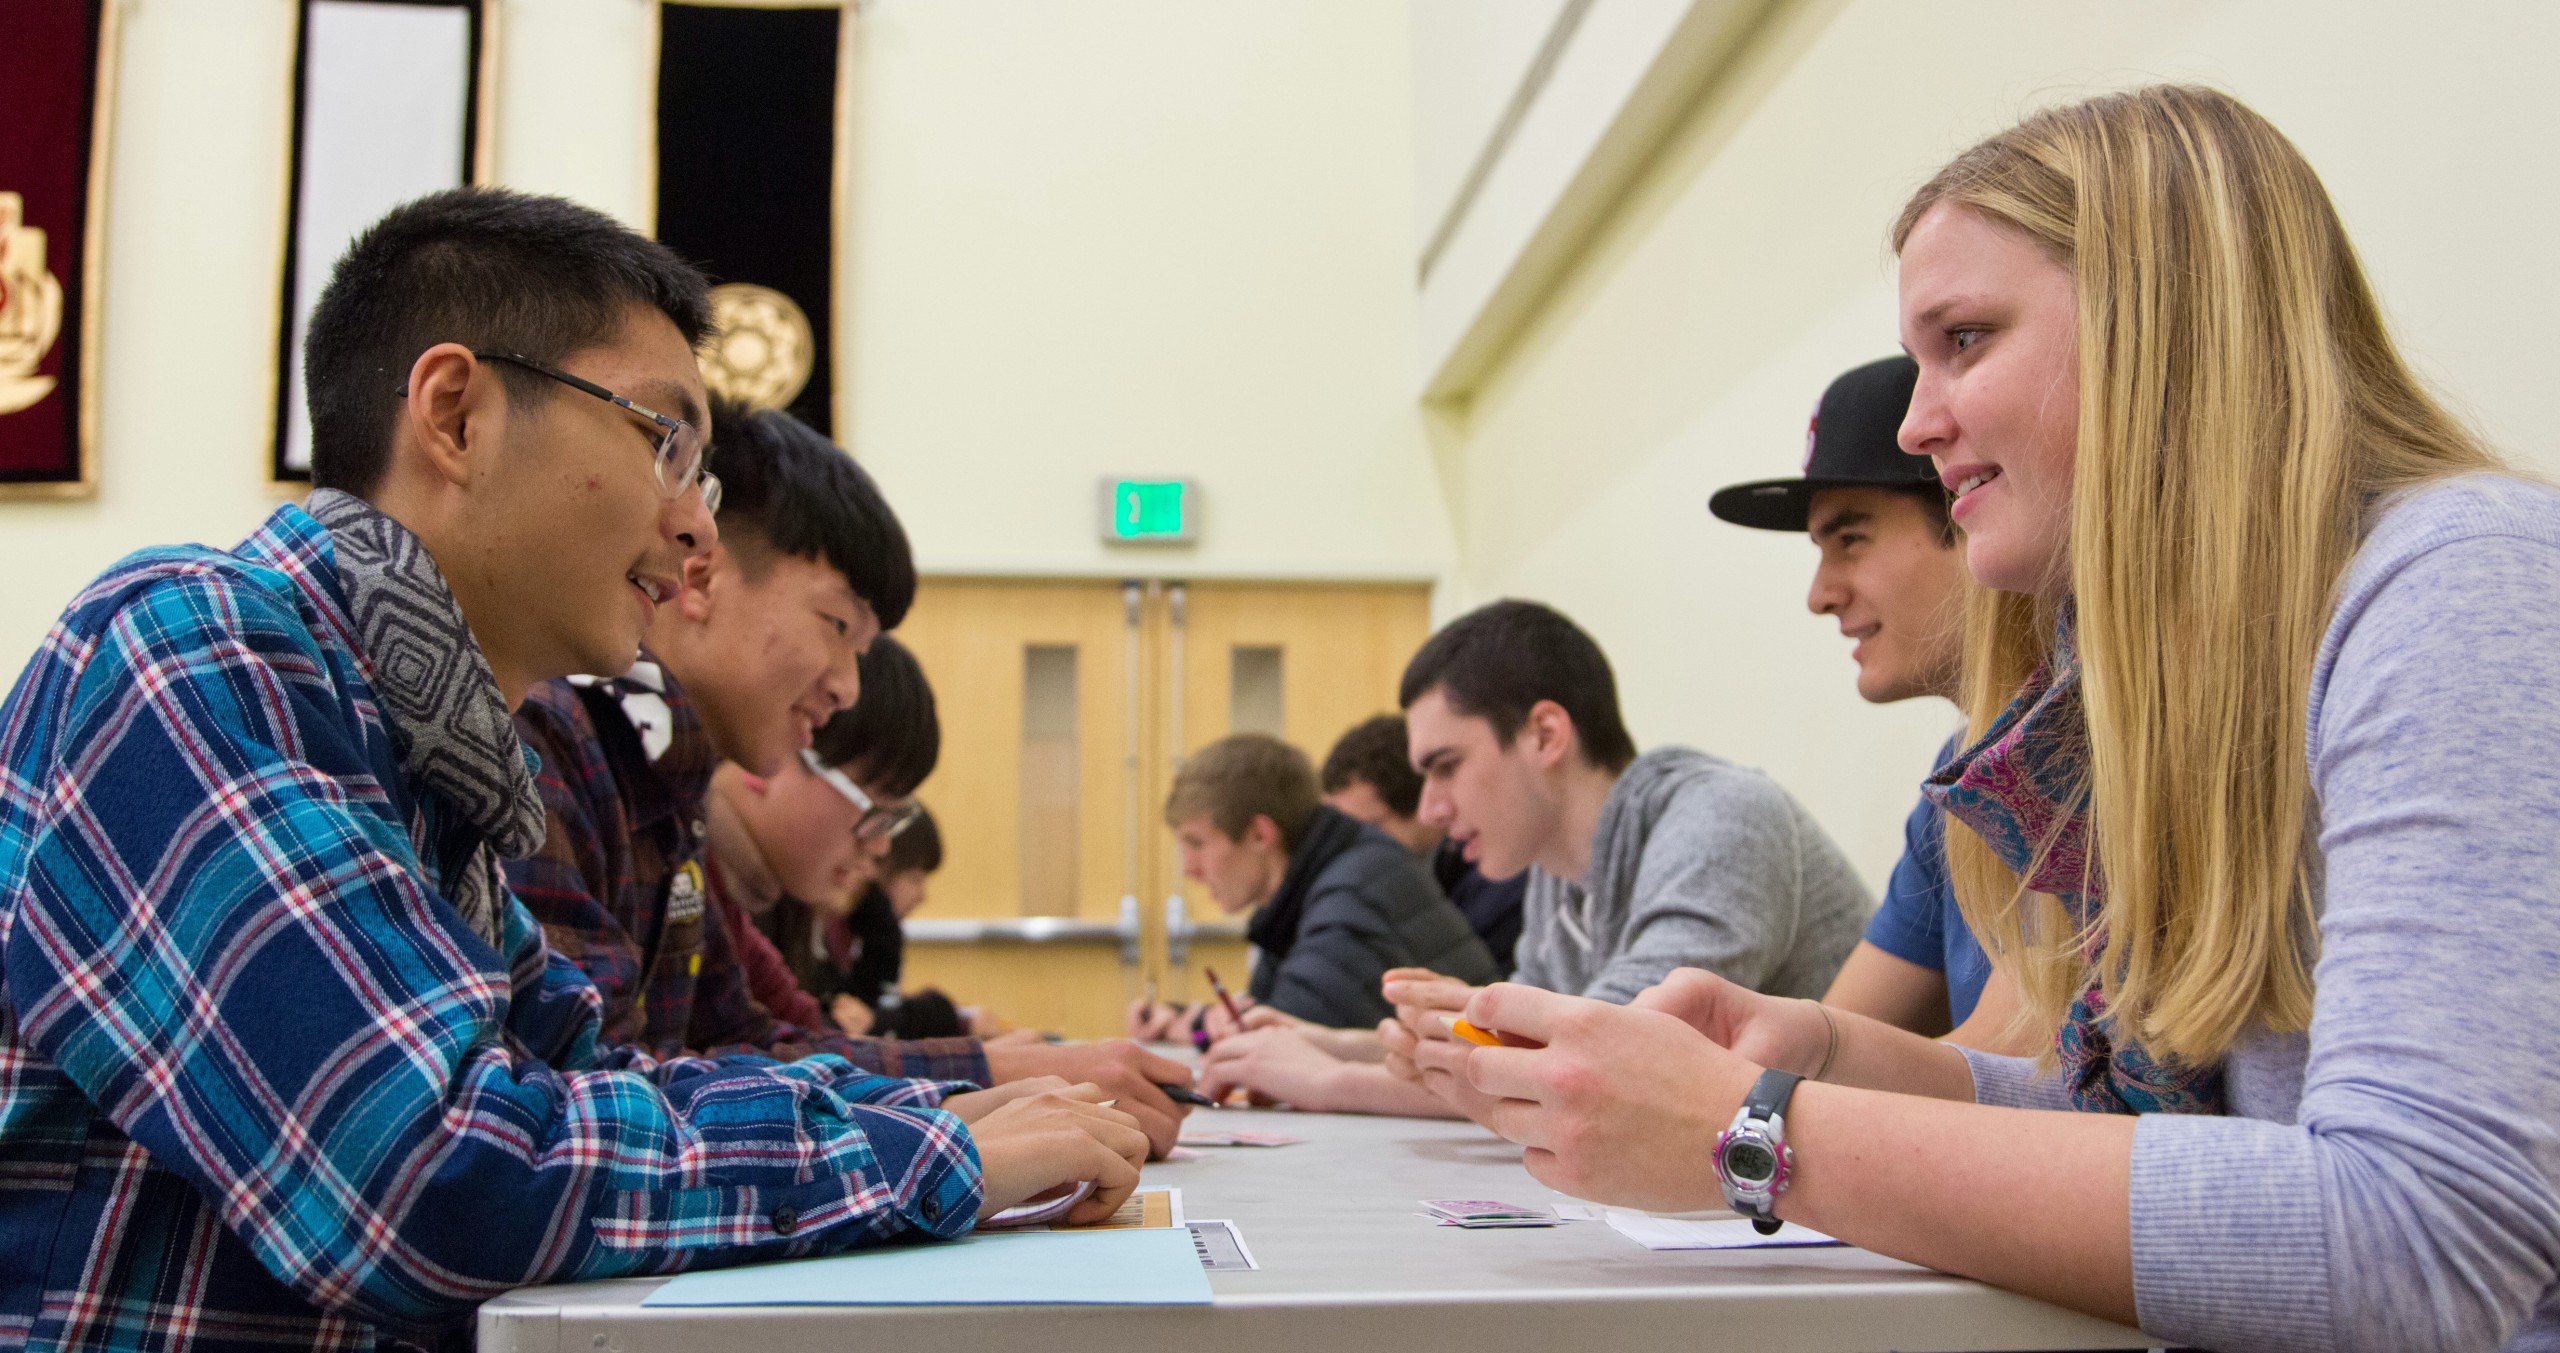 Chinese students pair up with Lutes in a “speed-dating” exercise at PLU on Jan. 30 designed to discover cultural intersections. (Photo: John Froschauer / PLU)